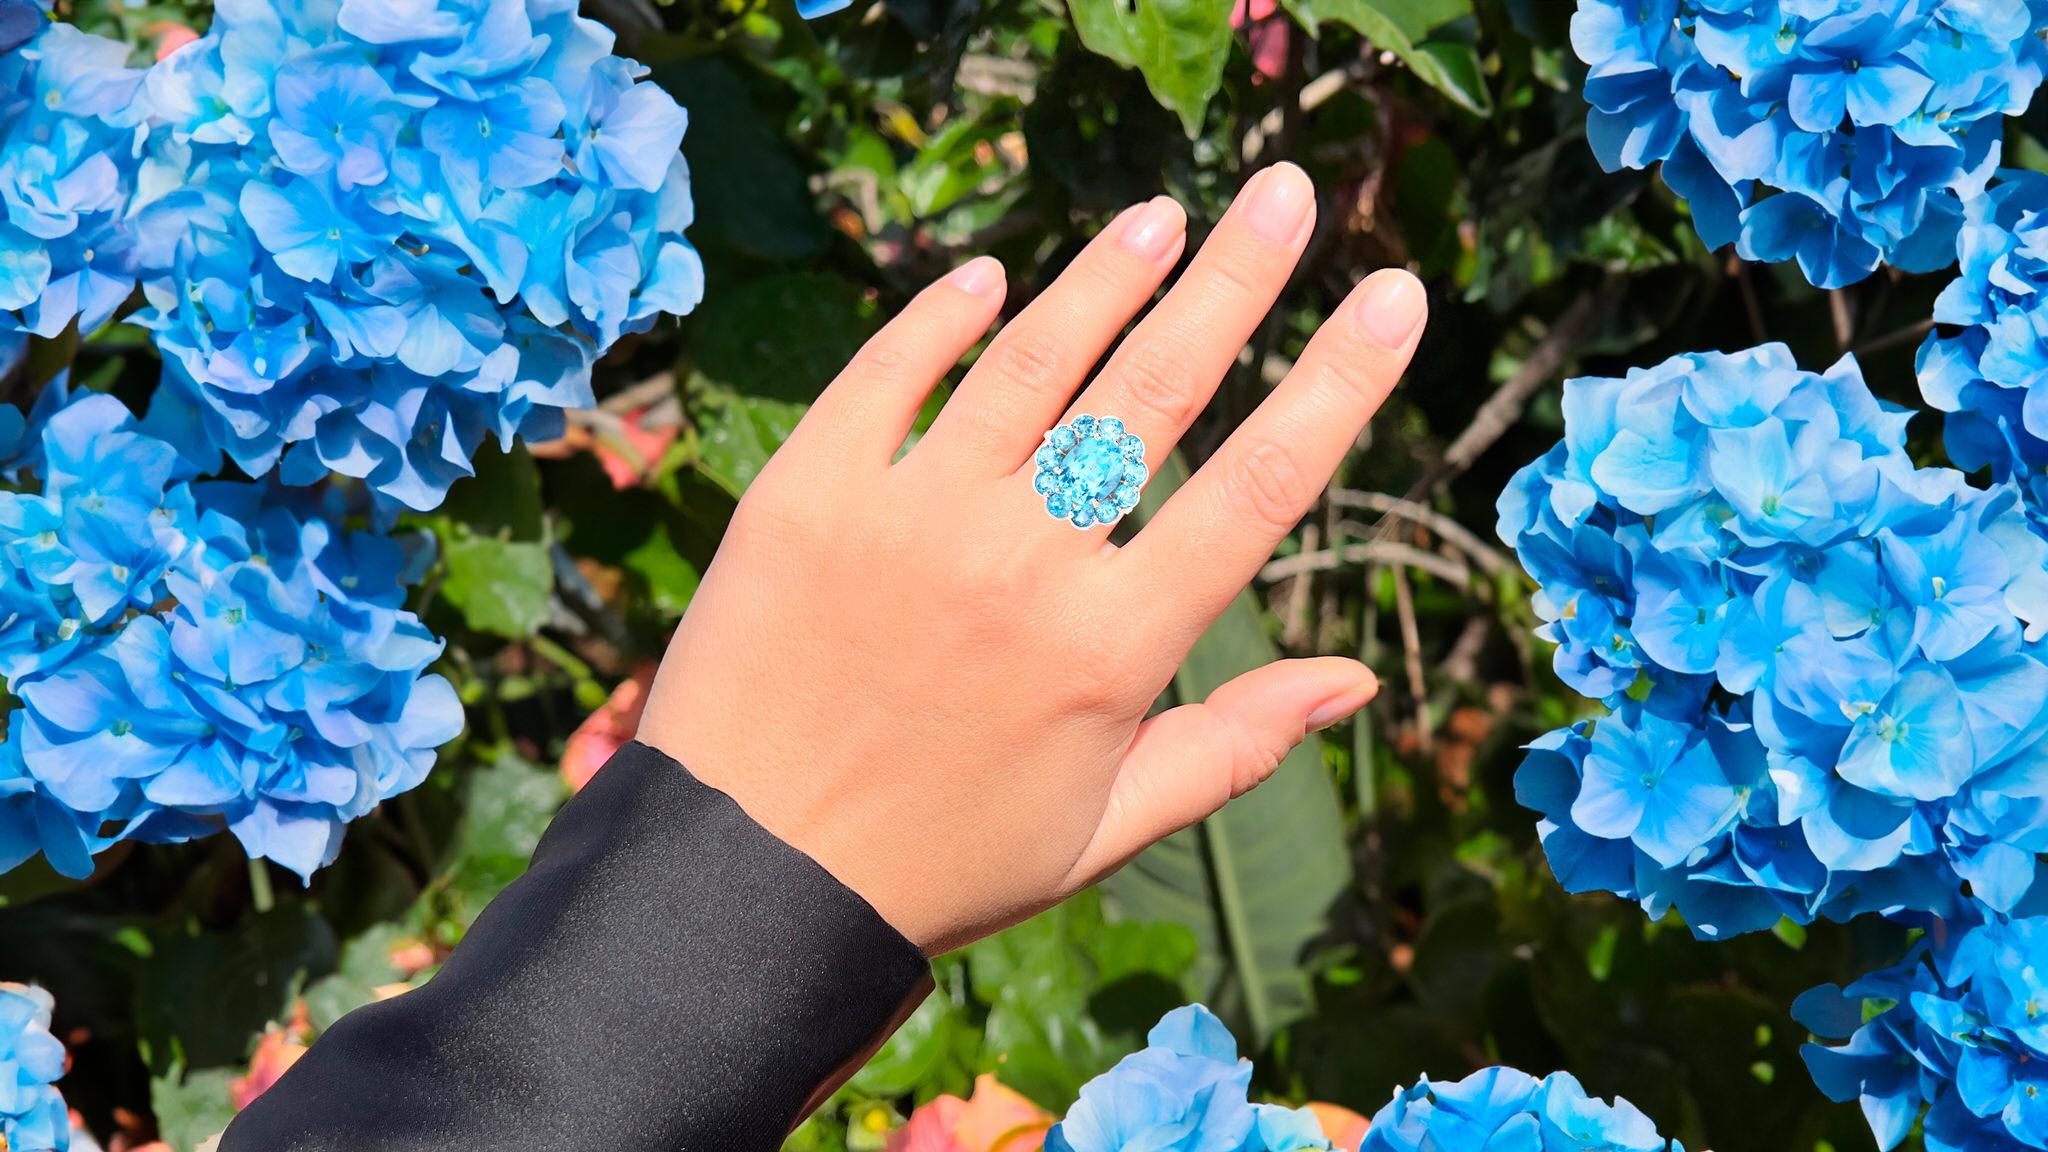 It comes with the Gemological Appraisal by GIA GG/AJP
All Gemstones are Natural
12 Swiss Blue Topazes = 8.80 Carats
Metal: Rhodium Plated Sterling Silver
Ring Size: 6* US
*It can be resized complimentary